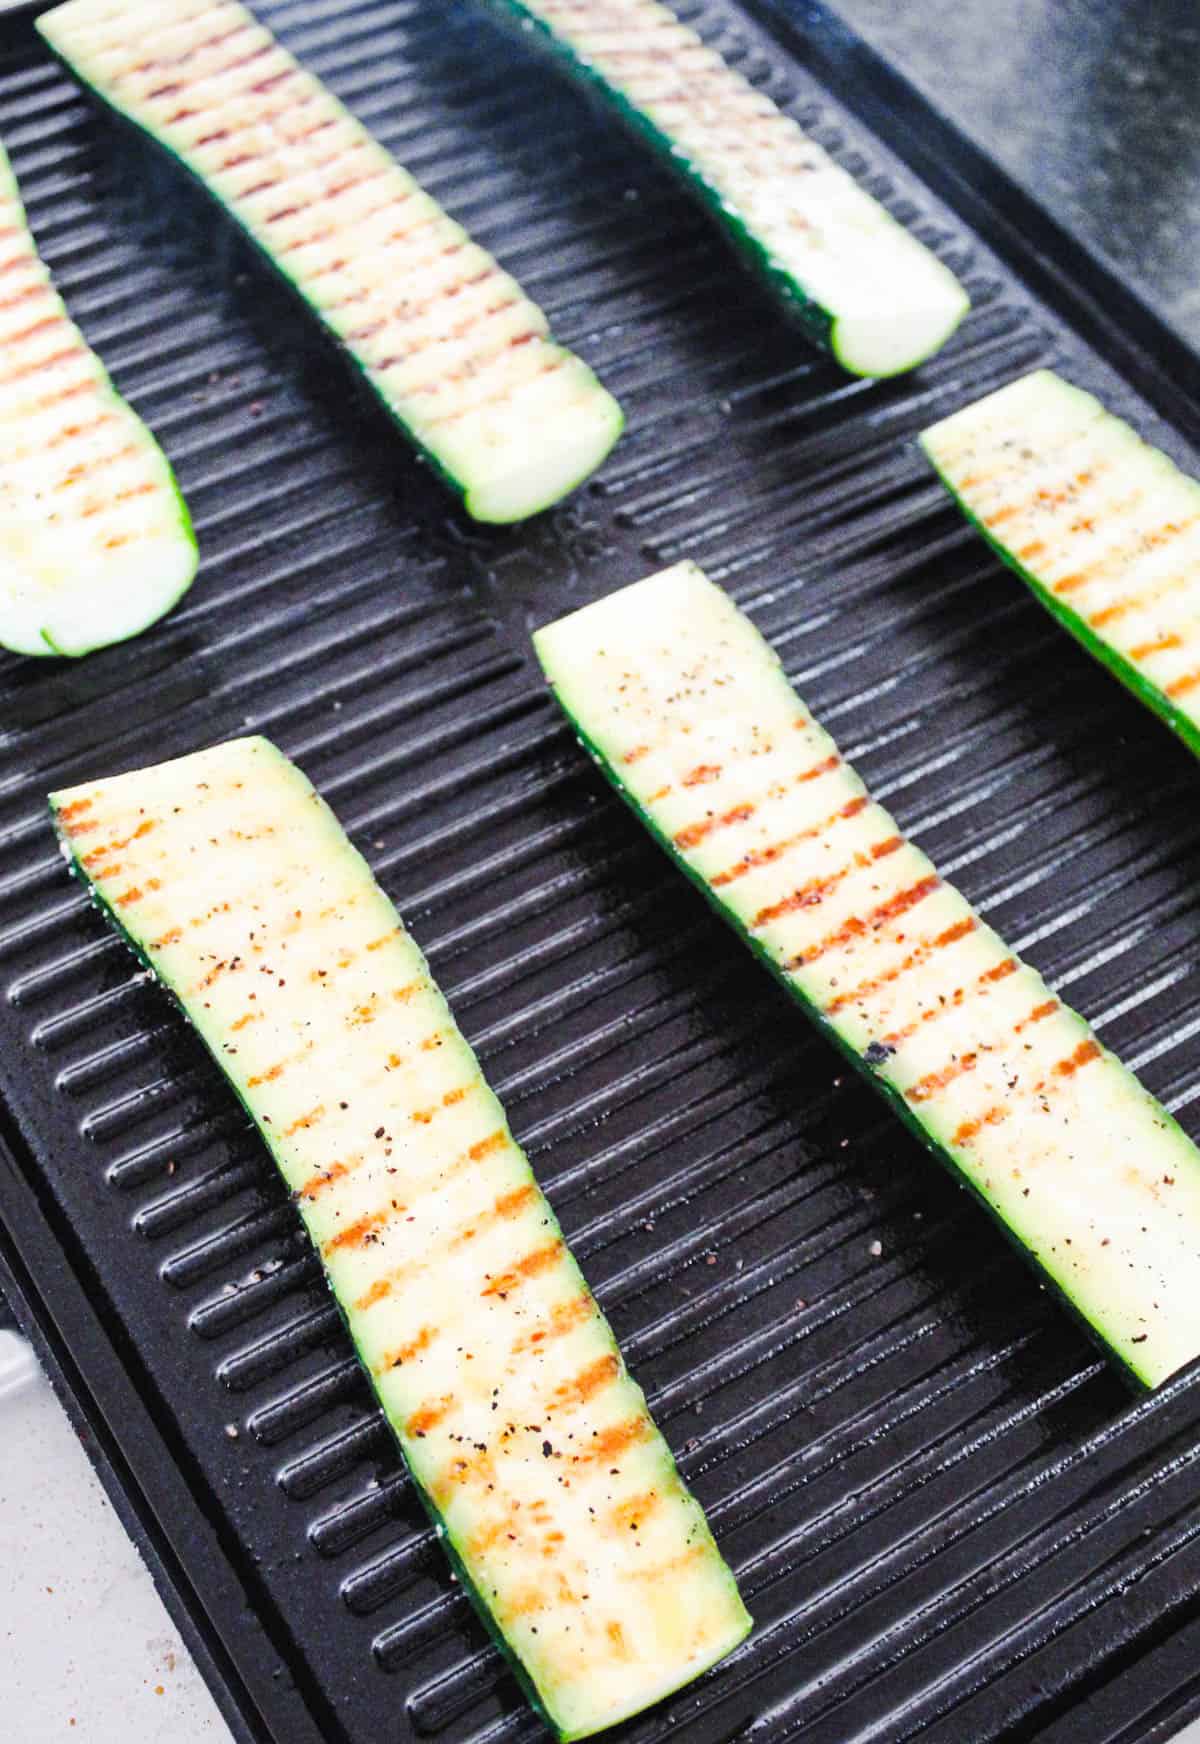 Zucchini halves on the grill with grill marks.